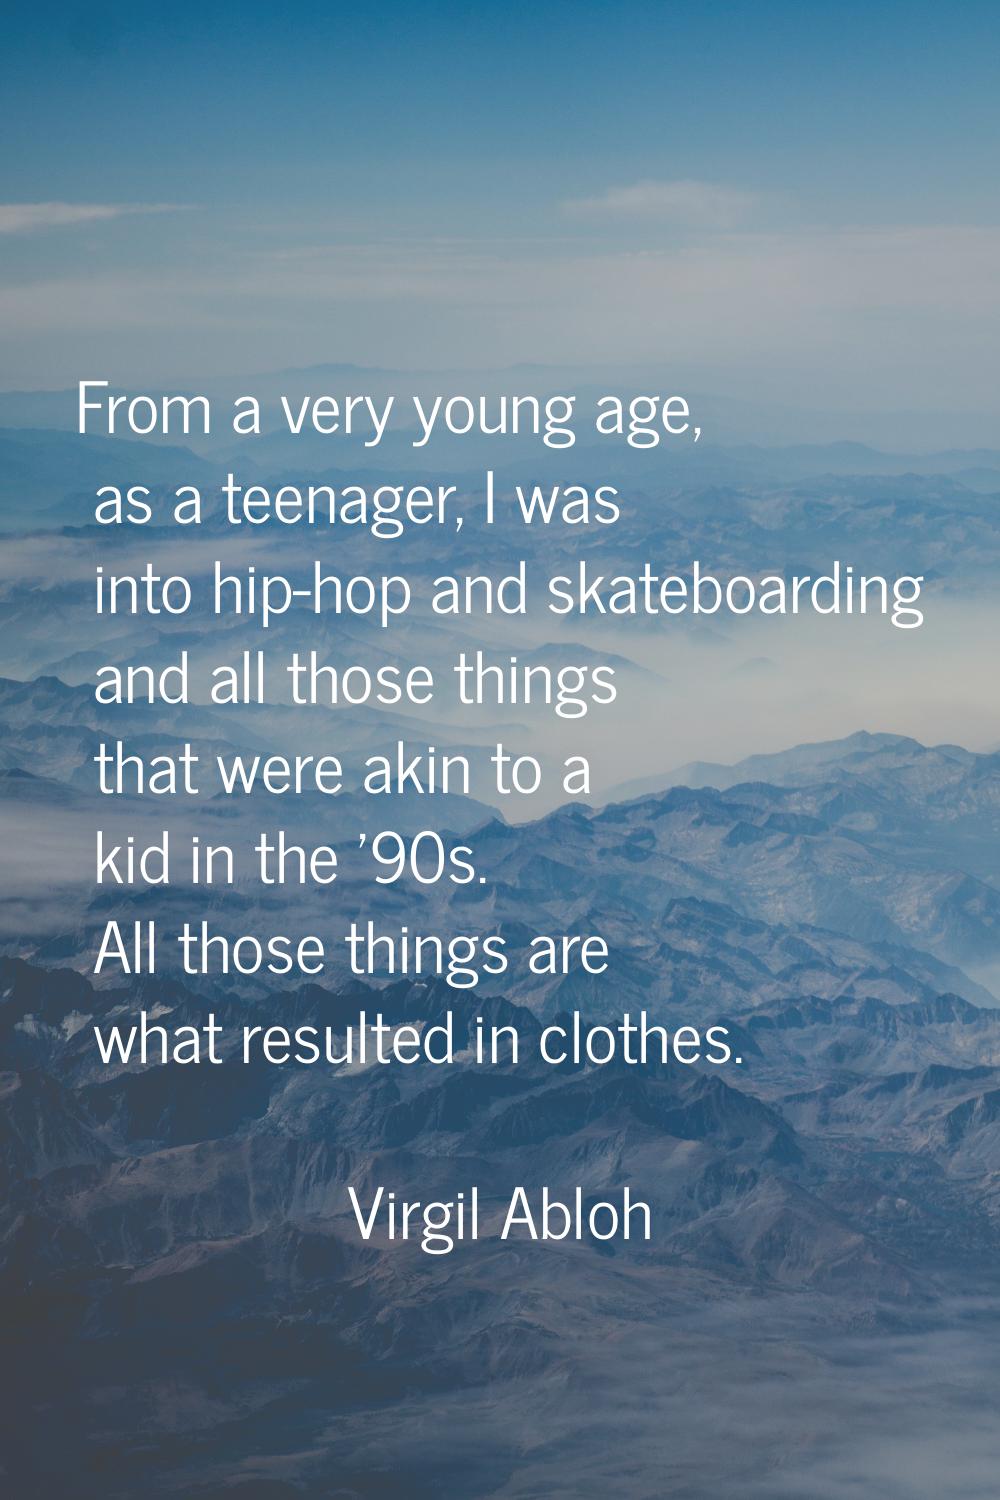 From a very young age, as a teenager, I was into hip-hop and skateboarding and all those things tha